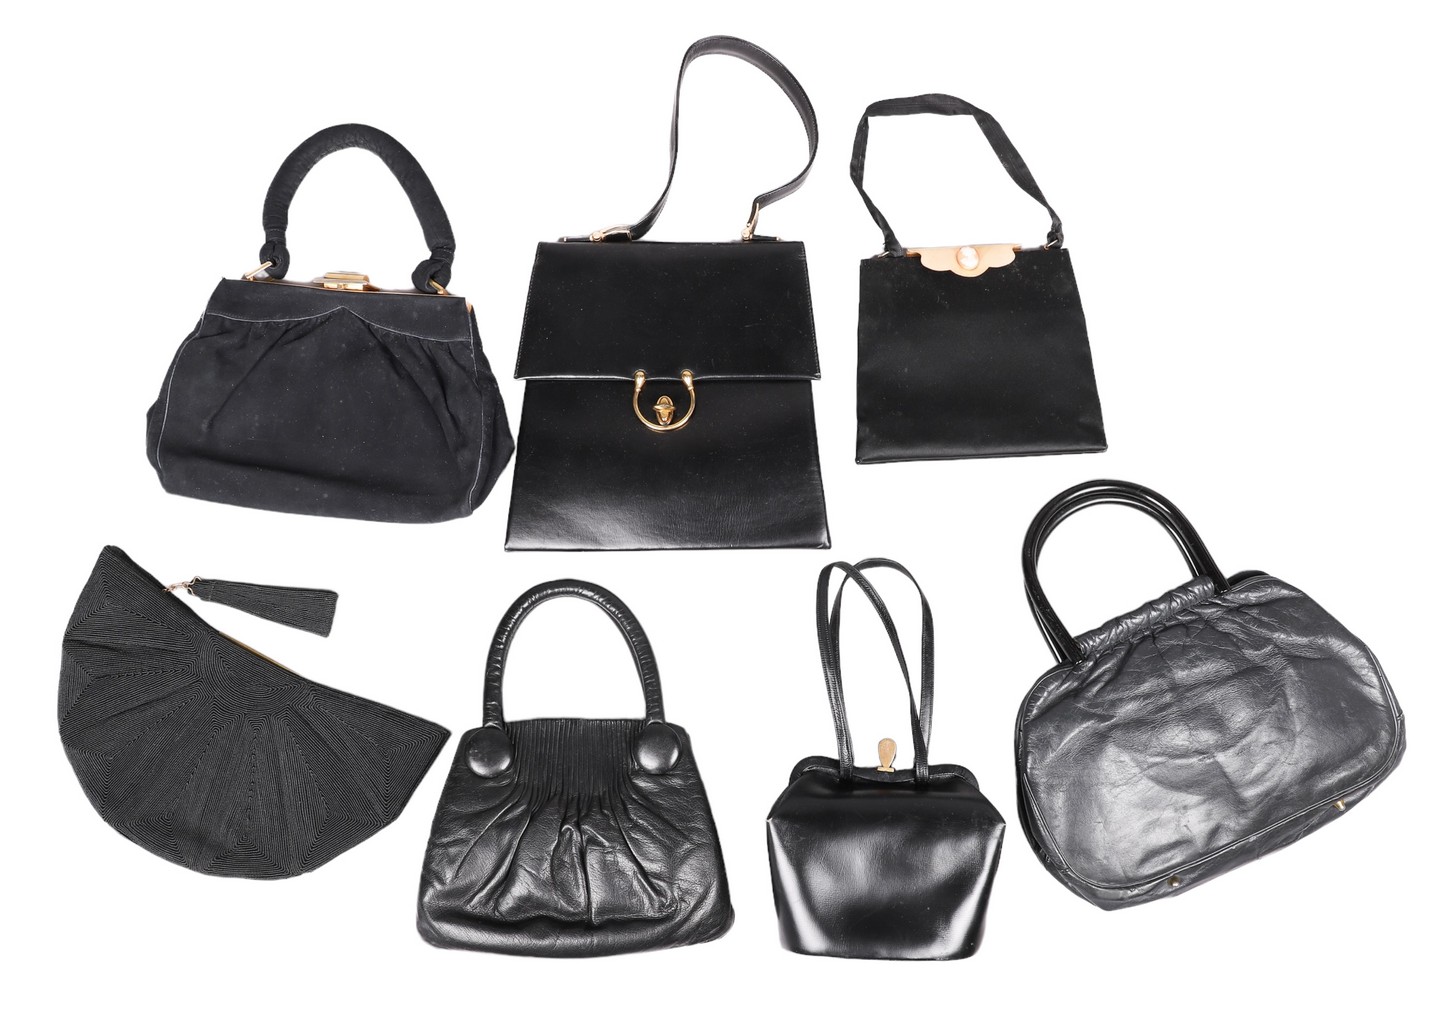 40 s 60 s ladies handbags to include 27a695